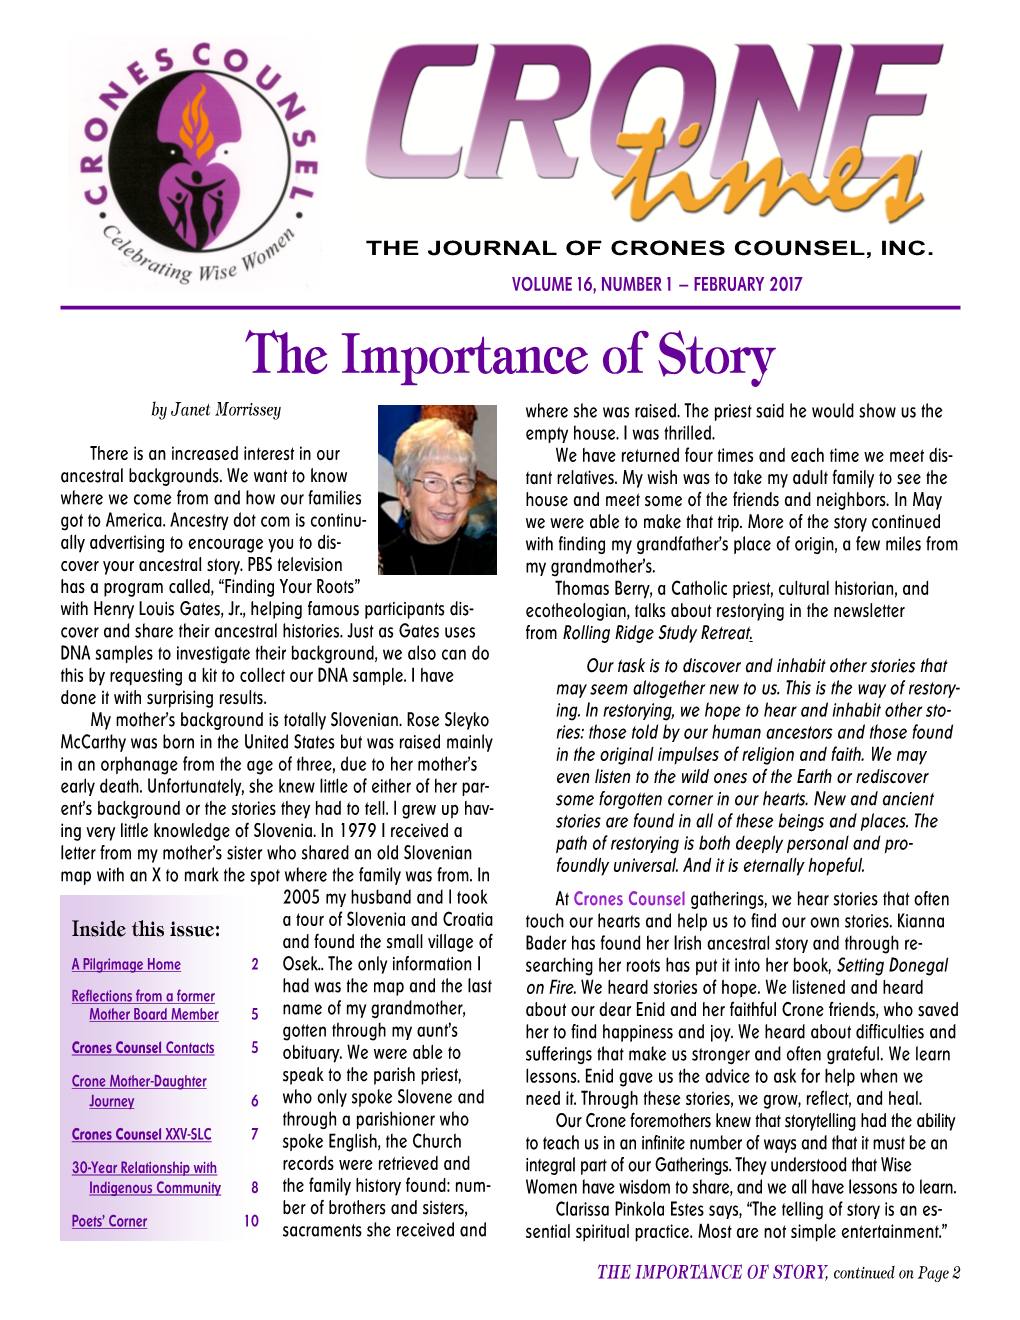 The Importance of Story by Janet Morrissey Where She Was Raised